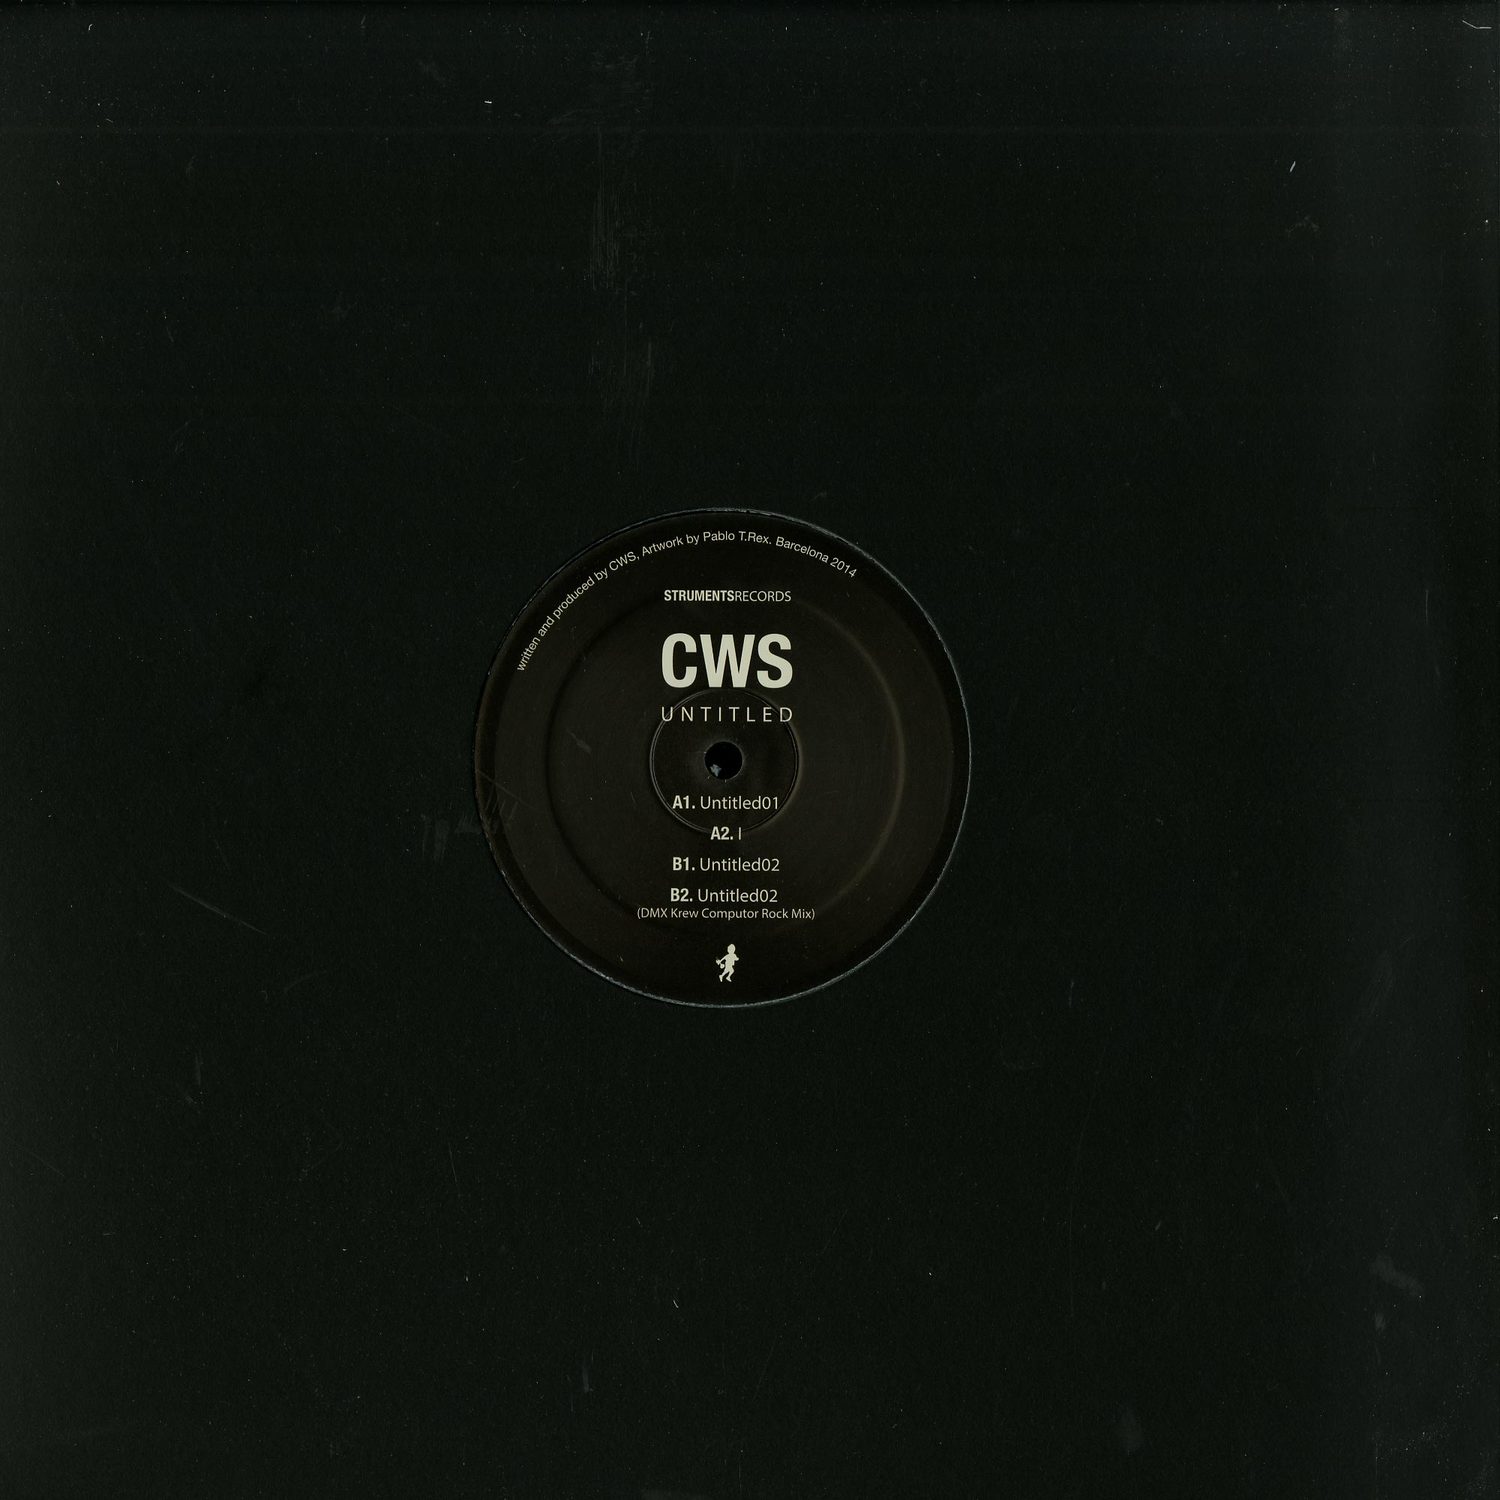 CWS - UNTITLED